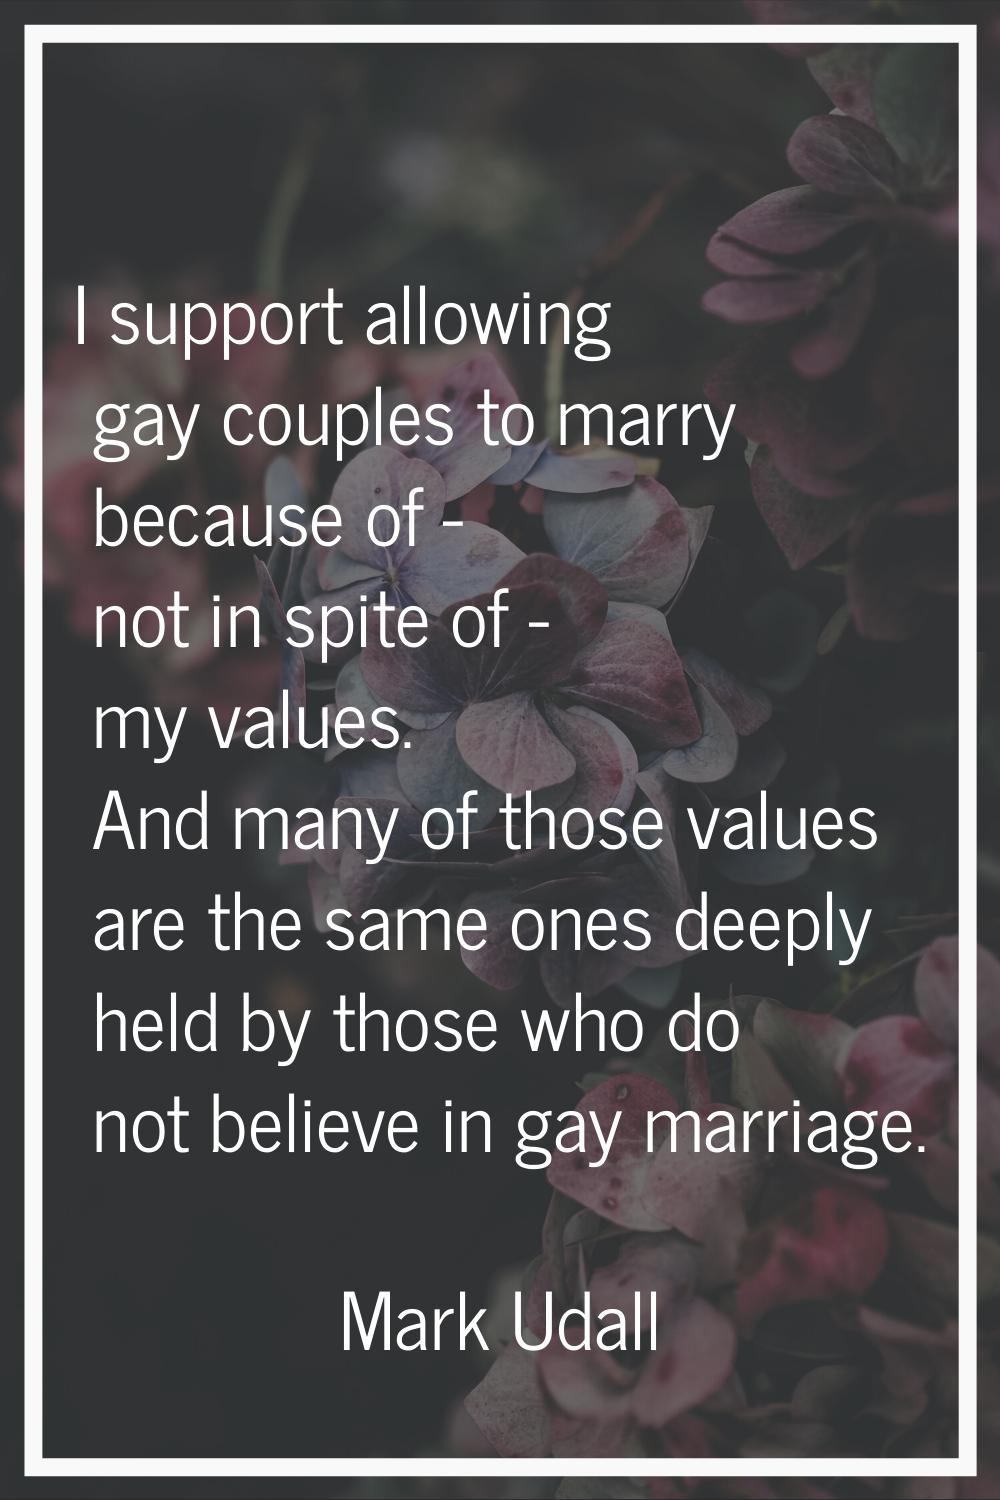 I support allowing gay couples to marry because of - not in spite of - my values. And many of those